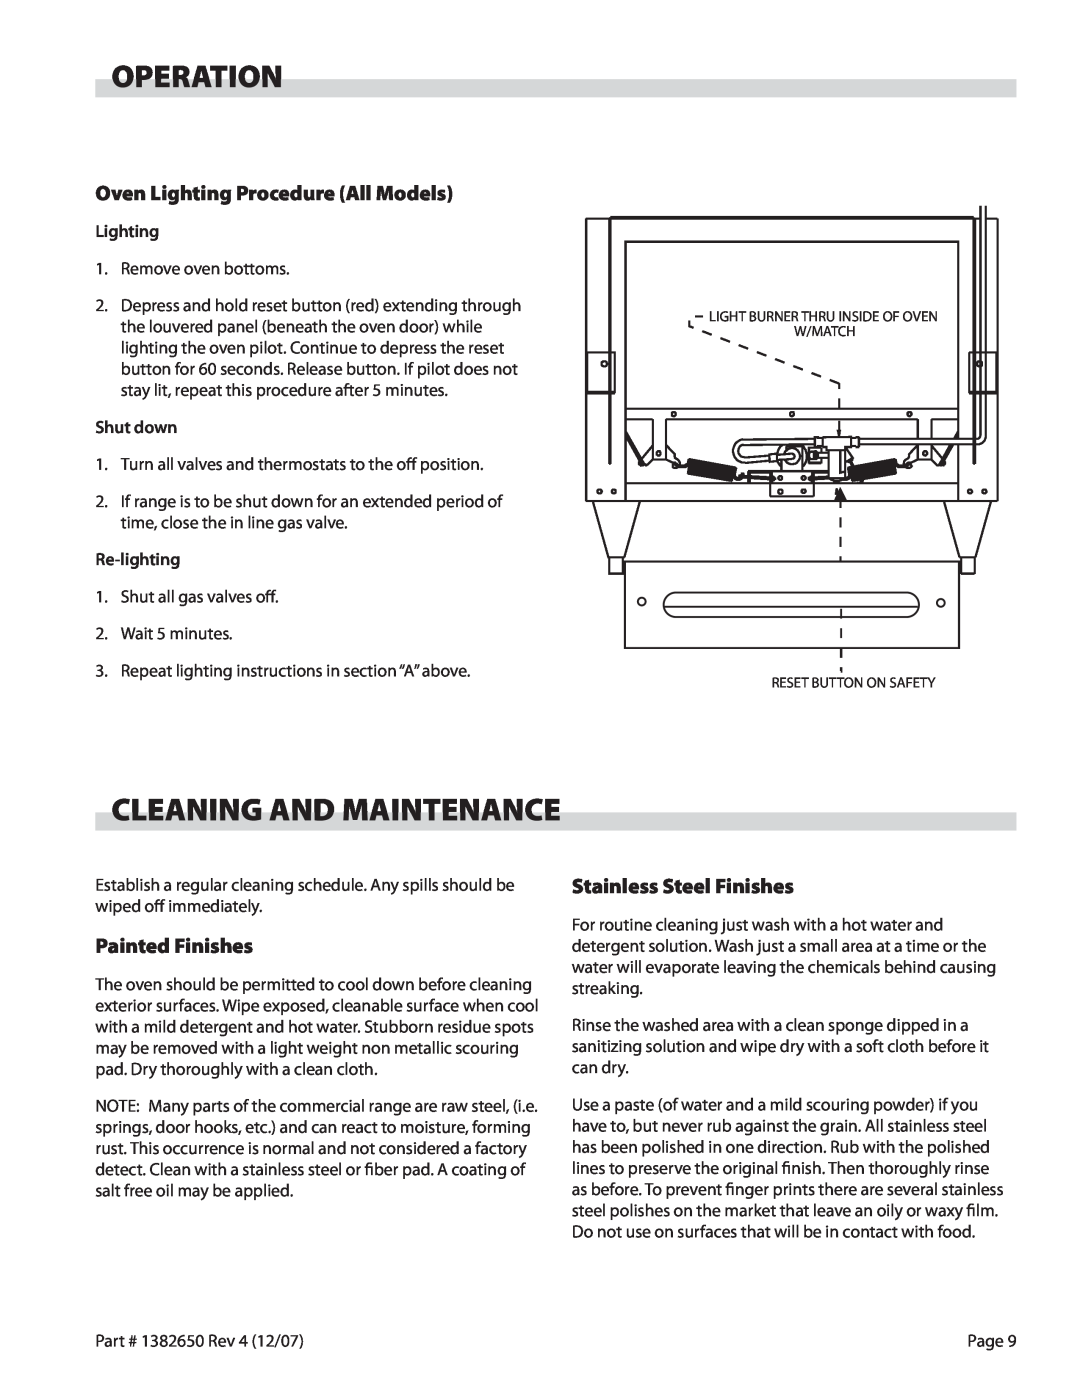 Garland G280-2 operation manual Operation, Cleaning And Maintenance, Oven Lighting Procedure All Models, Painted Finishes 